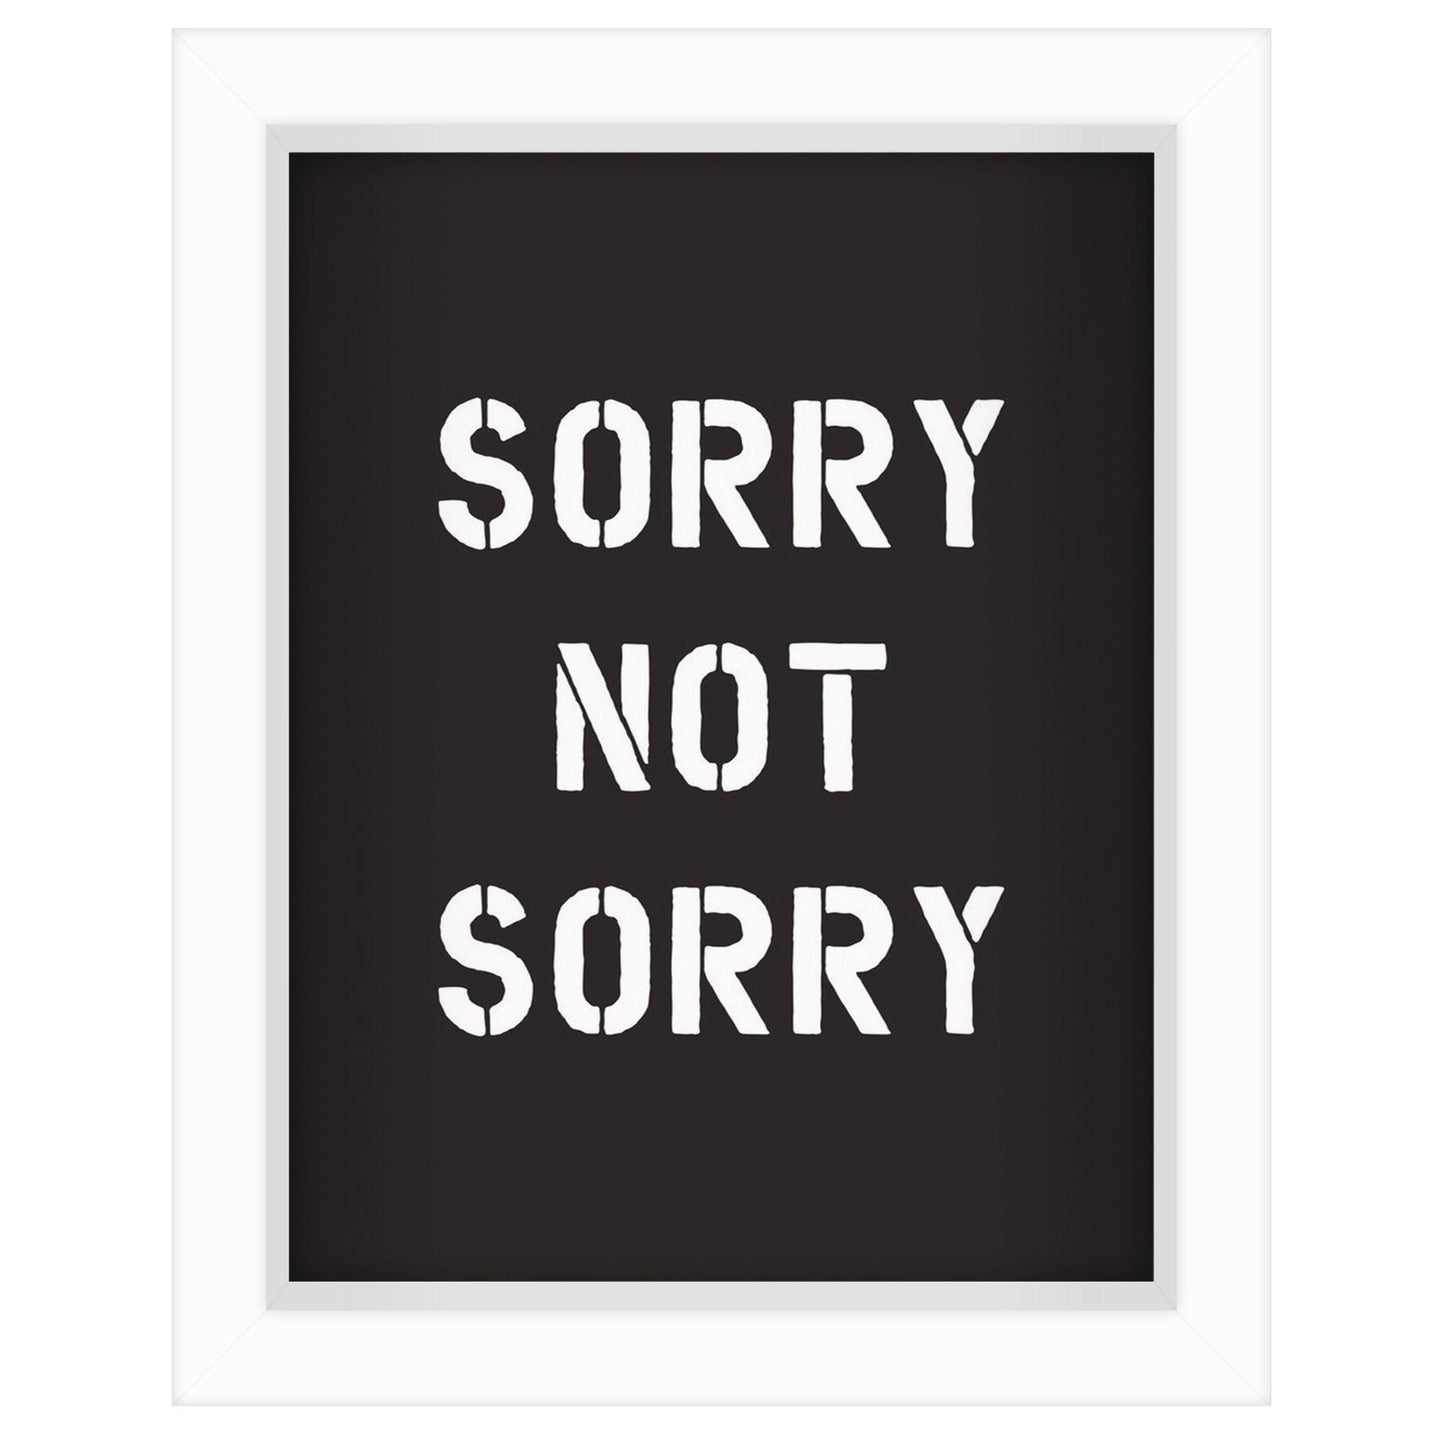 Sorry Not Sorry By Motivated Type - Shadow Box Framed Art - Americanflat